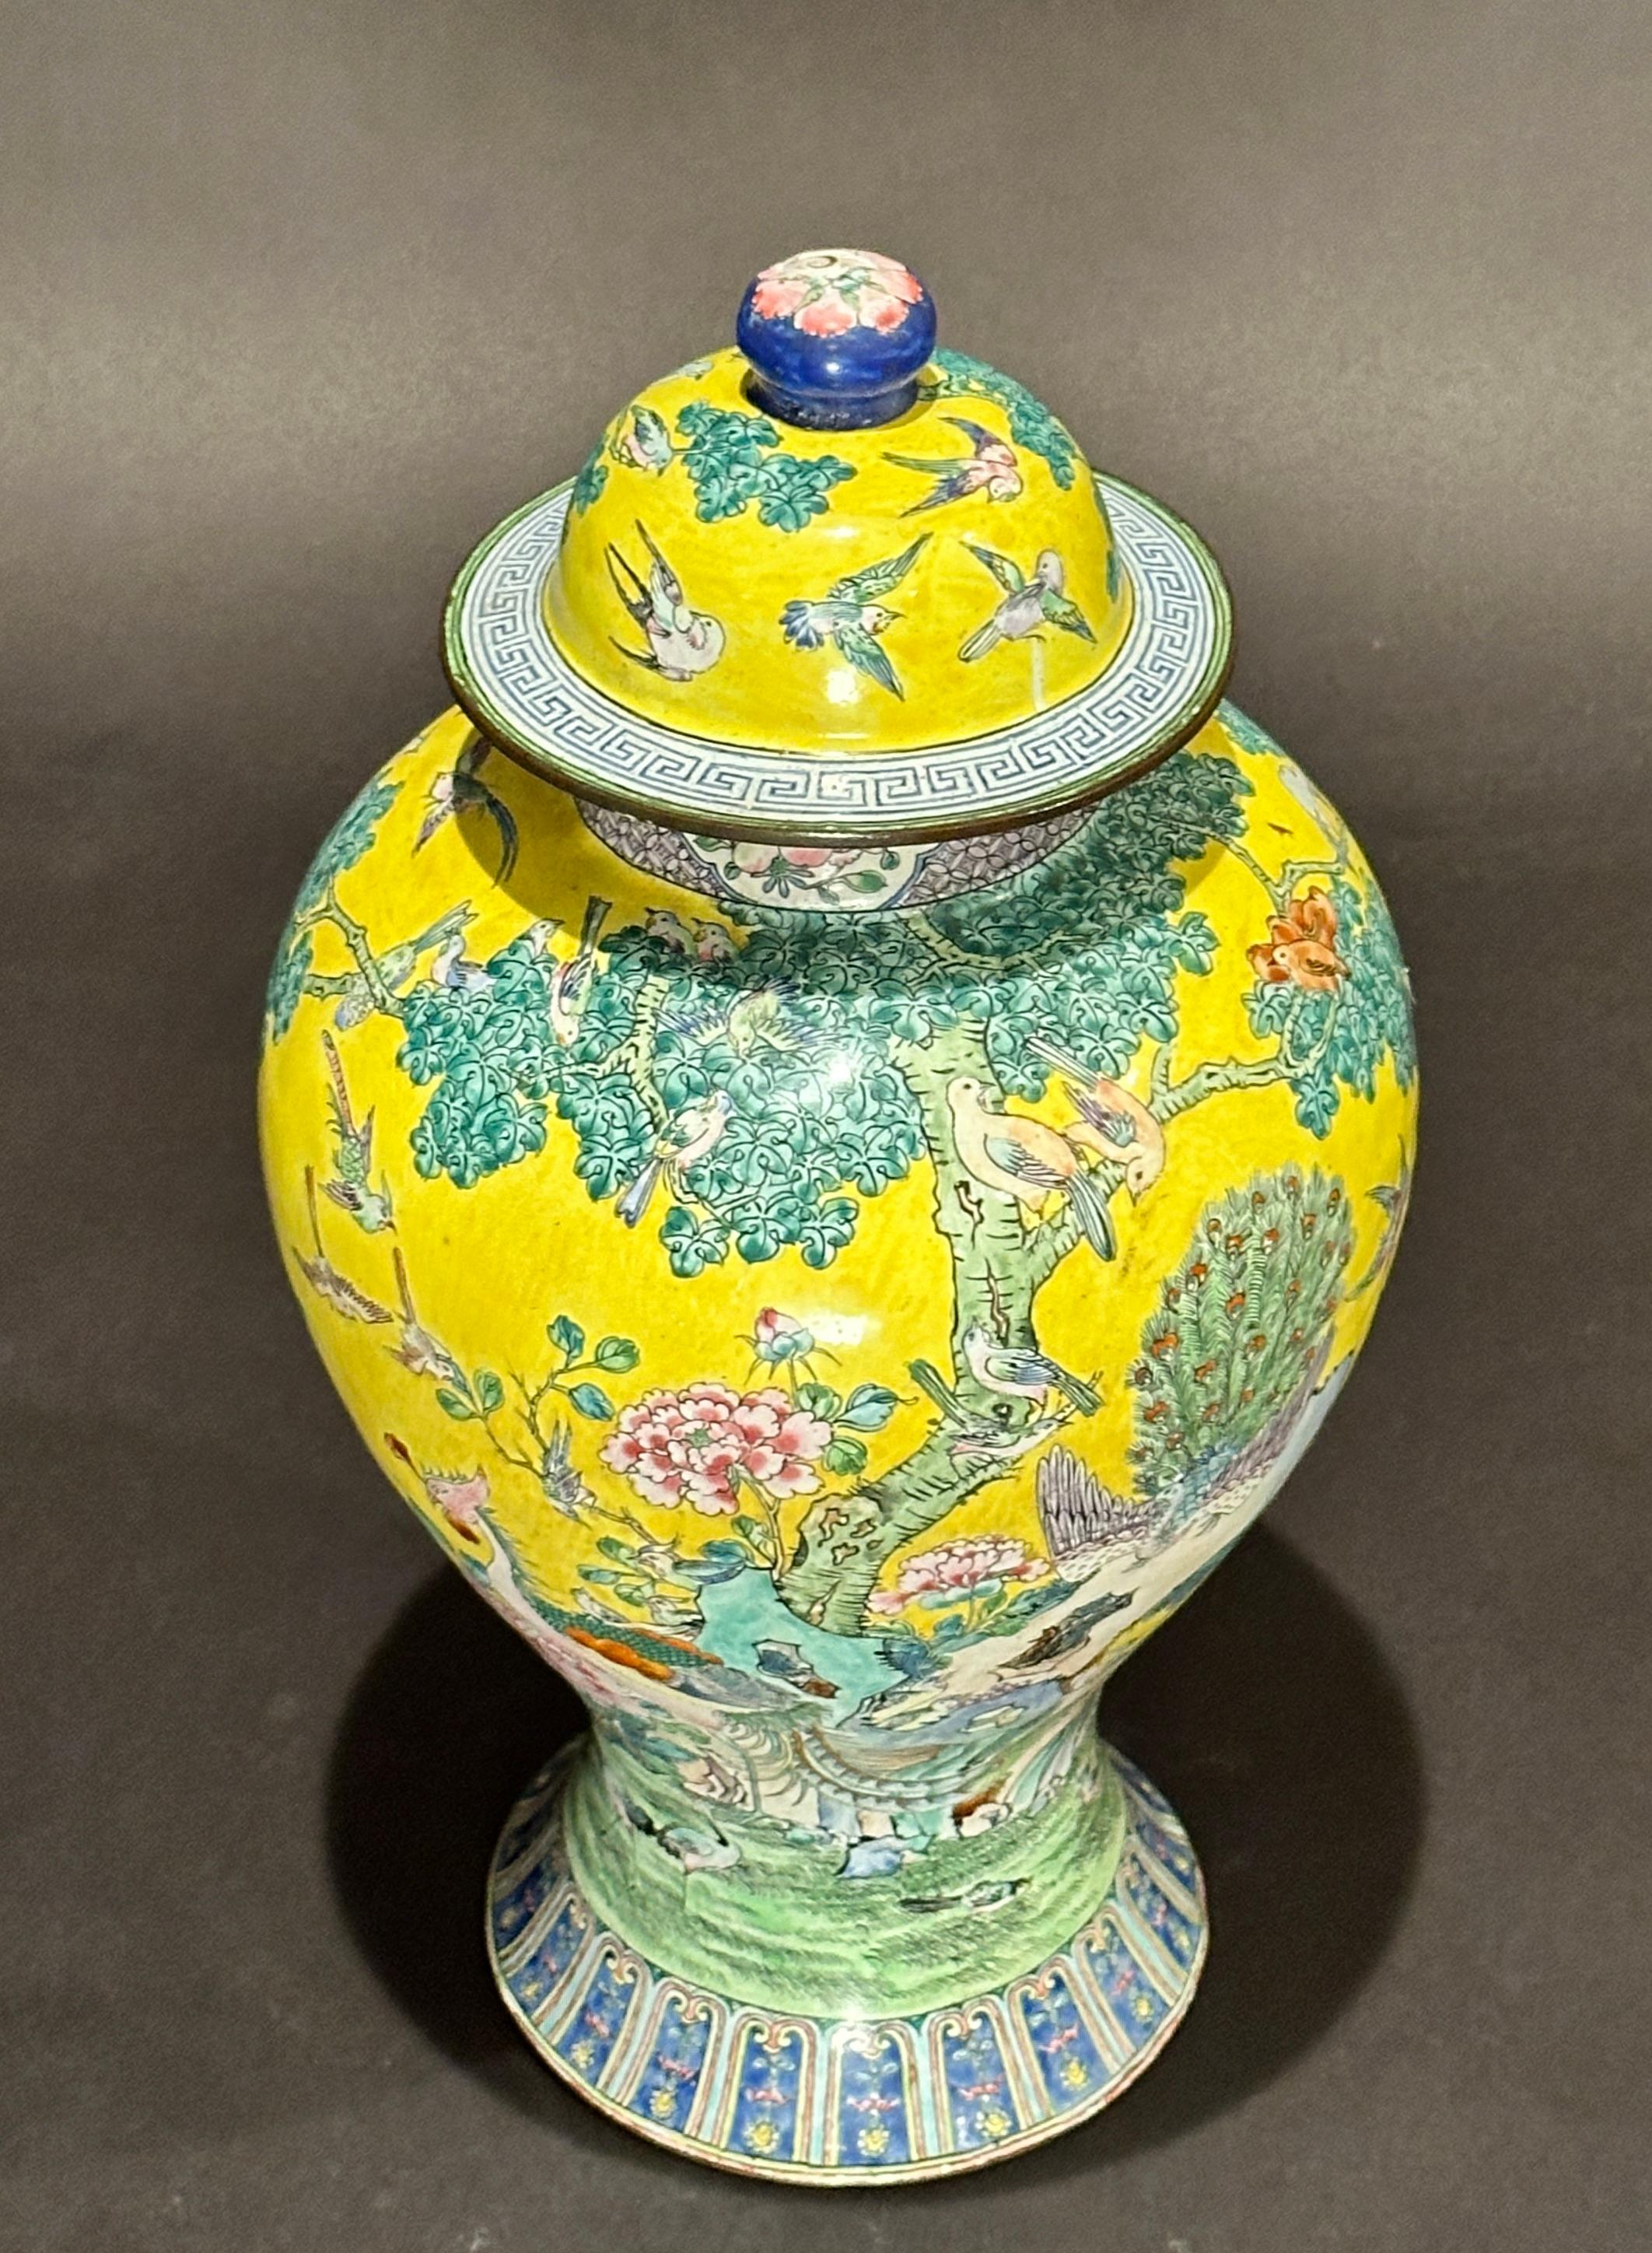 Finely enameled on copper Chinese covered ginger jar vase with yellow ground decoration, scenes of exotic birds and foliage. Colorful jar with yellow, greens. blues and whites. Bottom with double dragon.